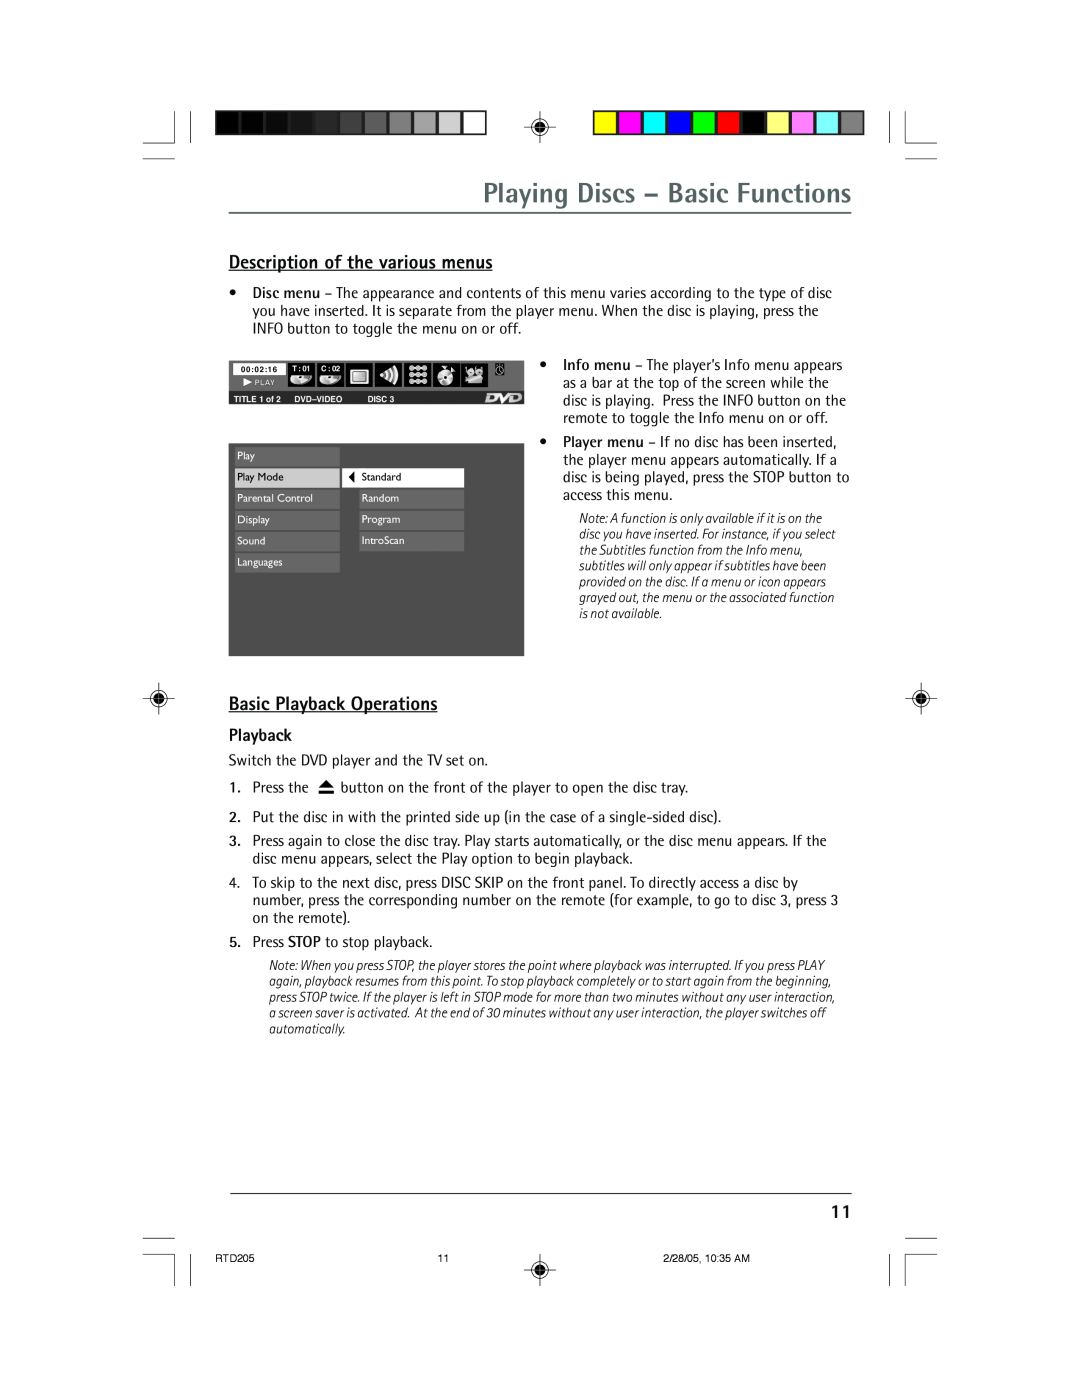 RCA RTD205 manual Playing Discs - Basic Functions, Description of the various menus, Basic Playback Operations 